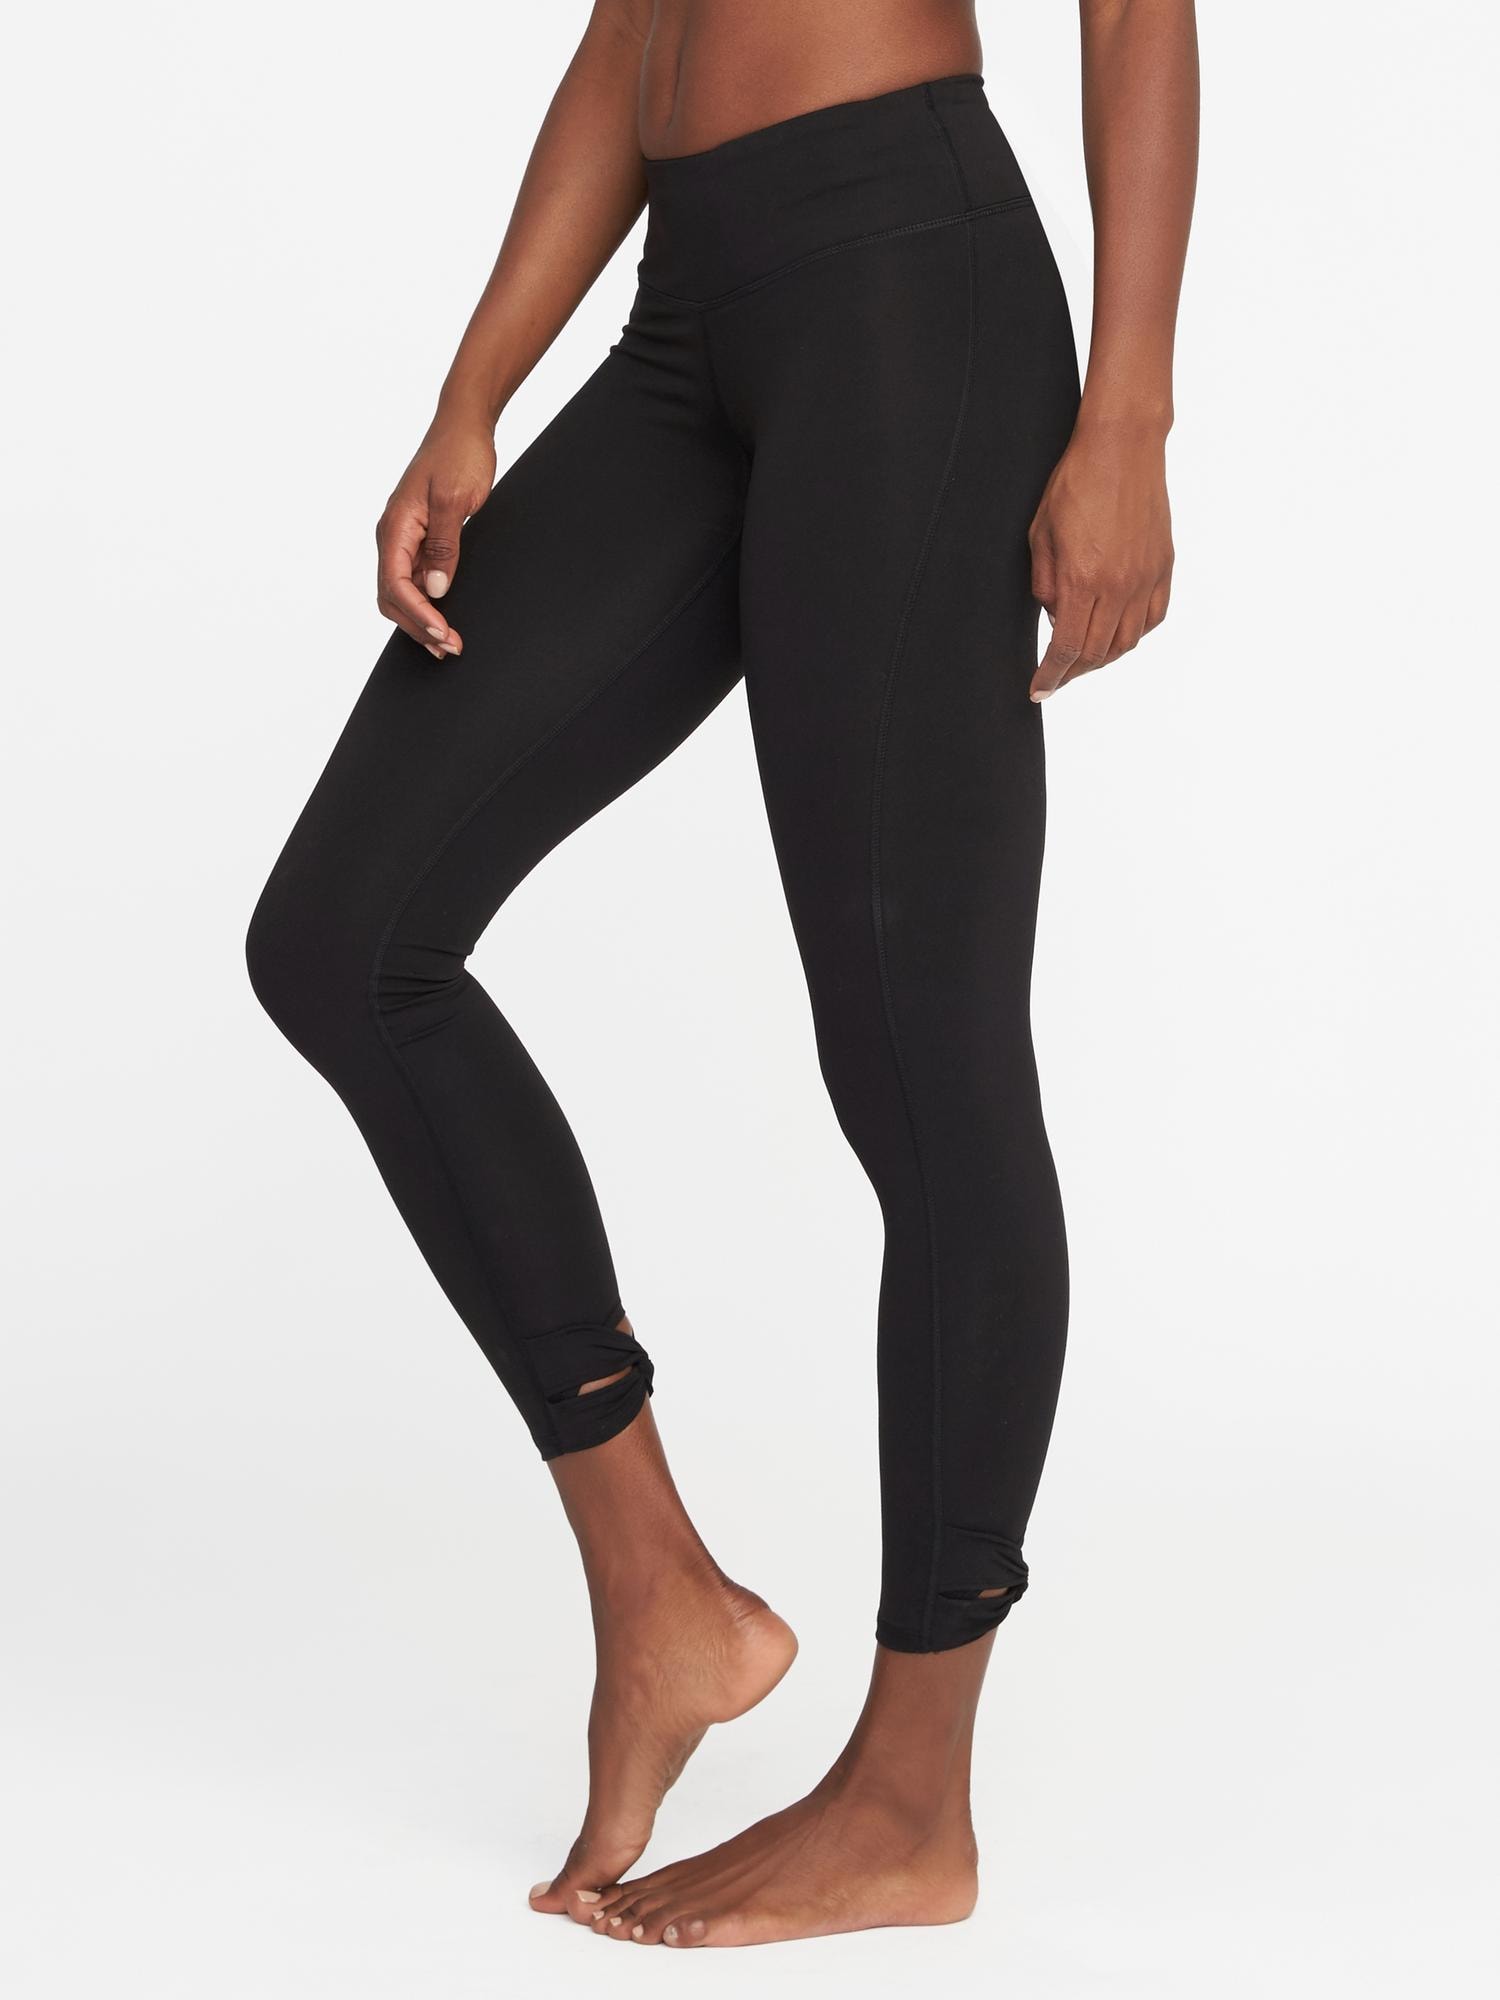 Mid-Rise 7/8-Length Compression Leggings for Women